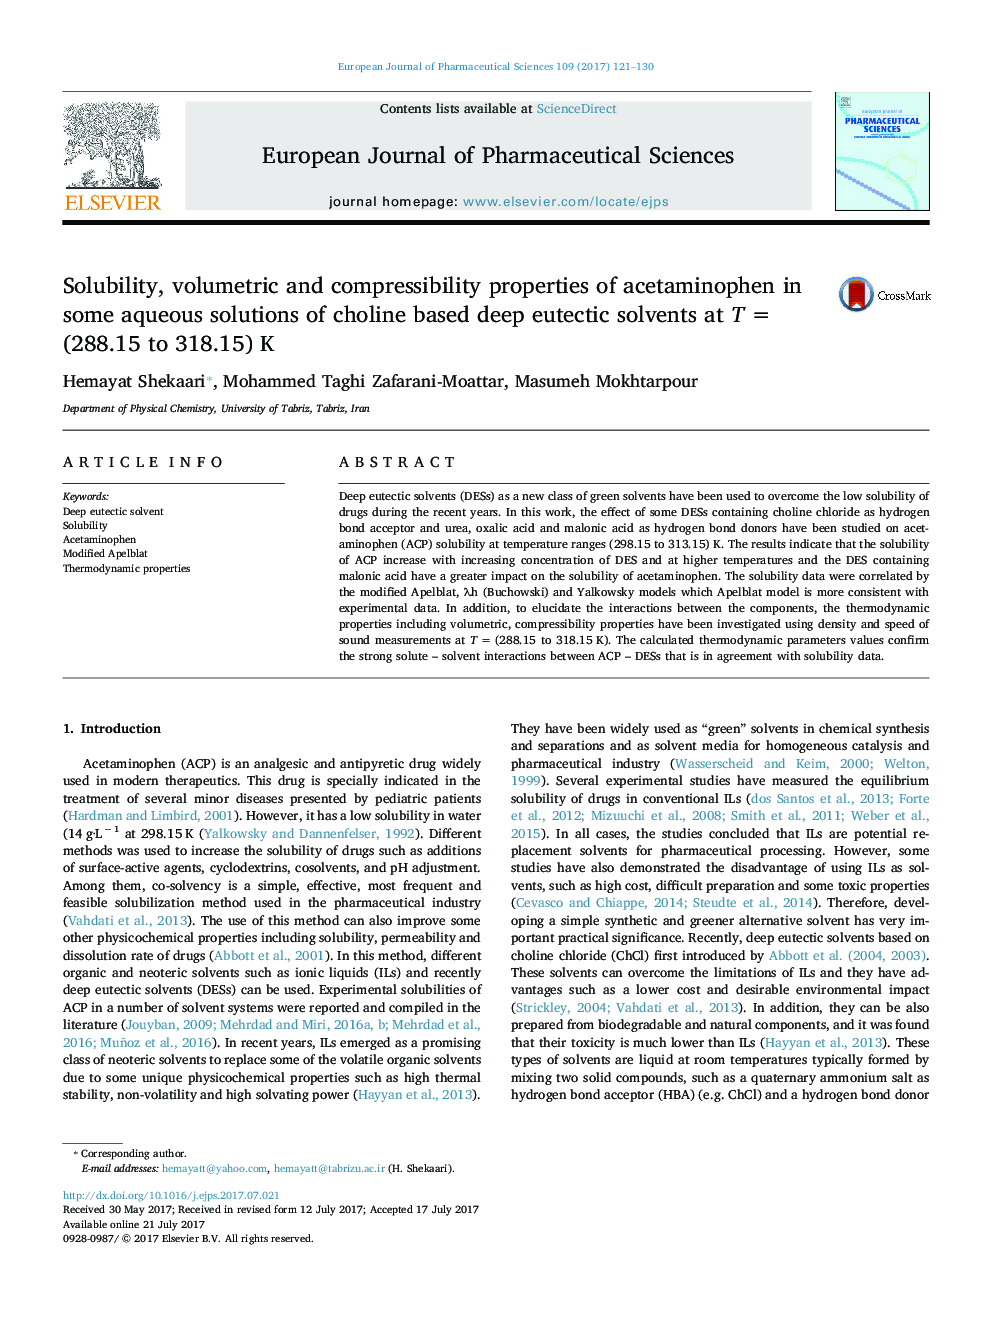 Solubility, volumetric and compressibility properties of acetaminophen in some aqueous solutions of choline based deep eutectic solvents at T = (288.15 to 318.15) K